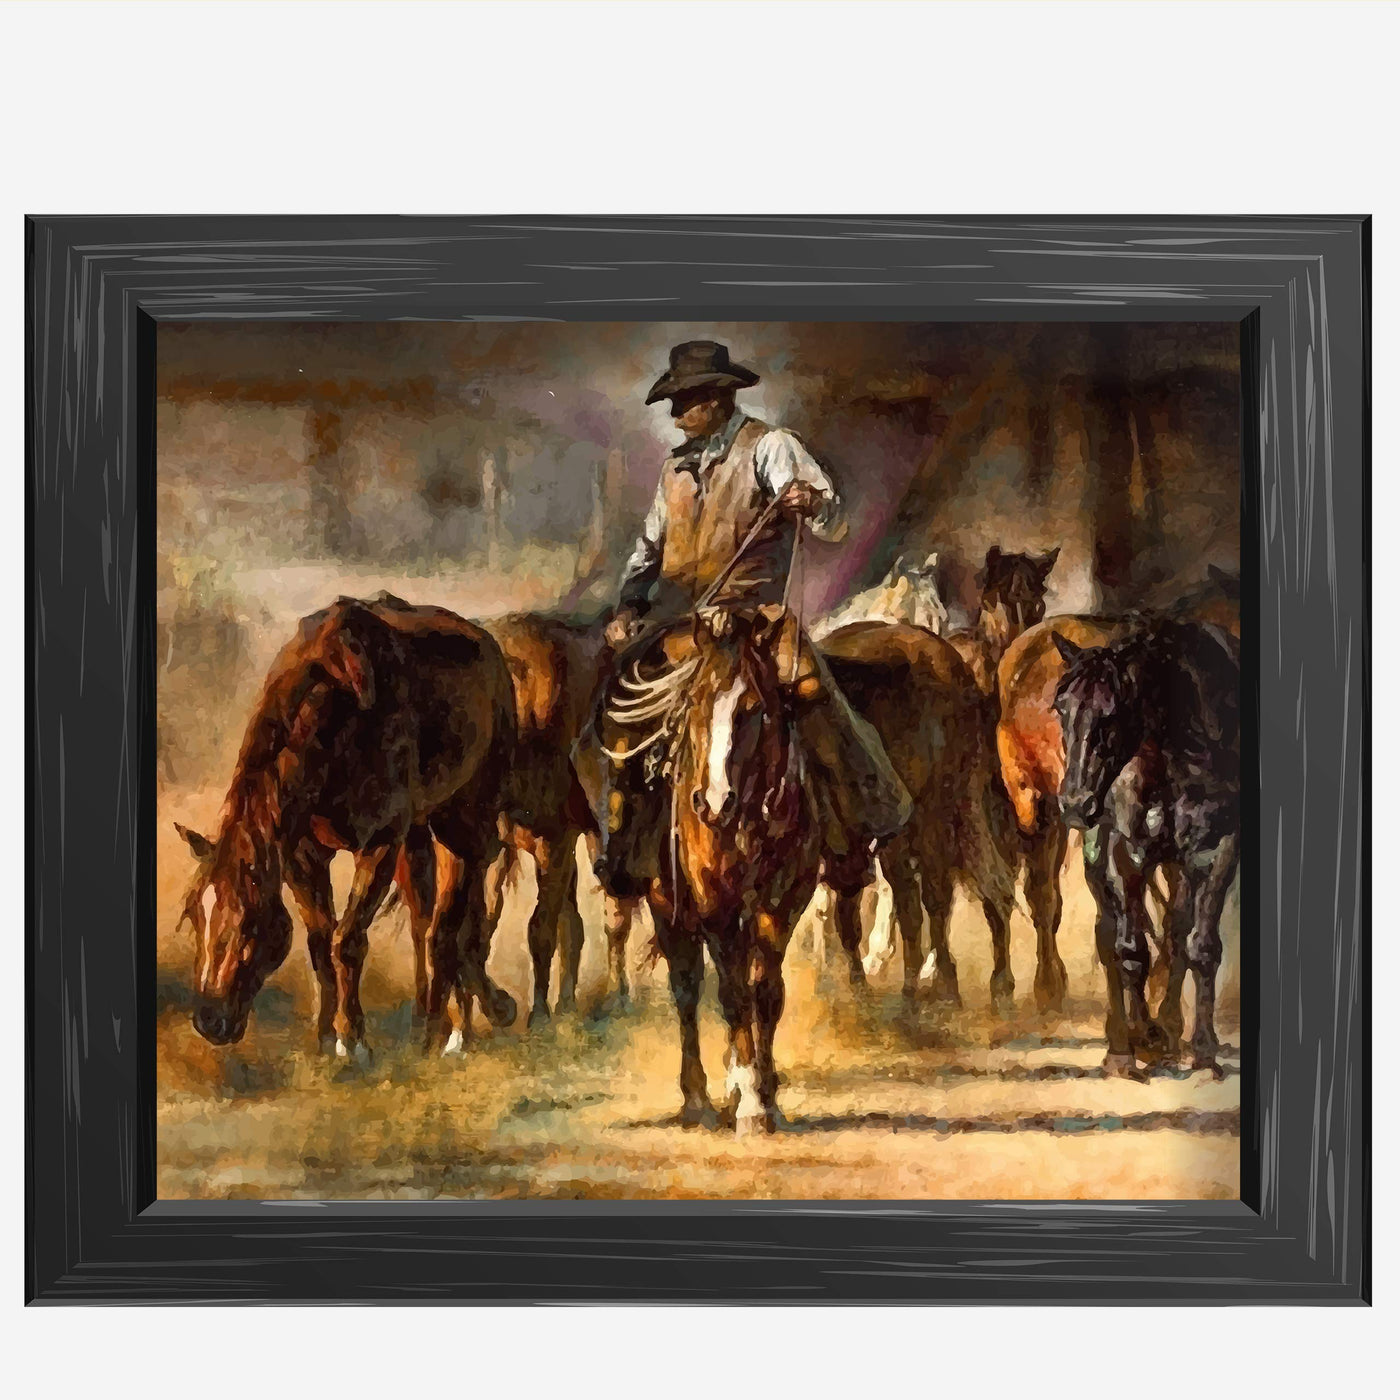 Cowboy Riding Horses- Western Wall Art Sign- 10 x 8"- Country Rustic Replica Art Print-Ready to Frame. Home-Lodge-Camp-Cabin Decor. Great Gift for Cowboys & Horse Lovers!